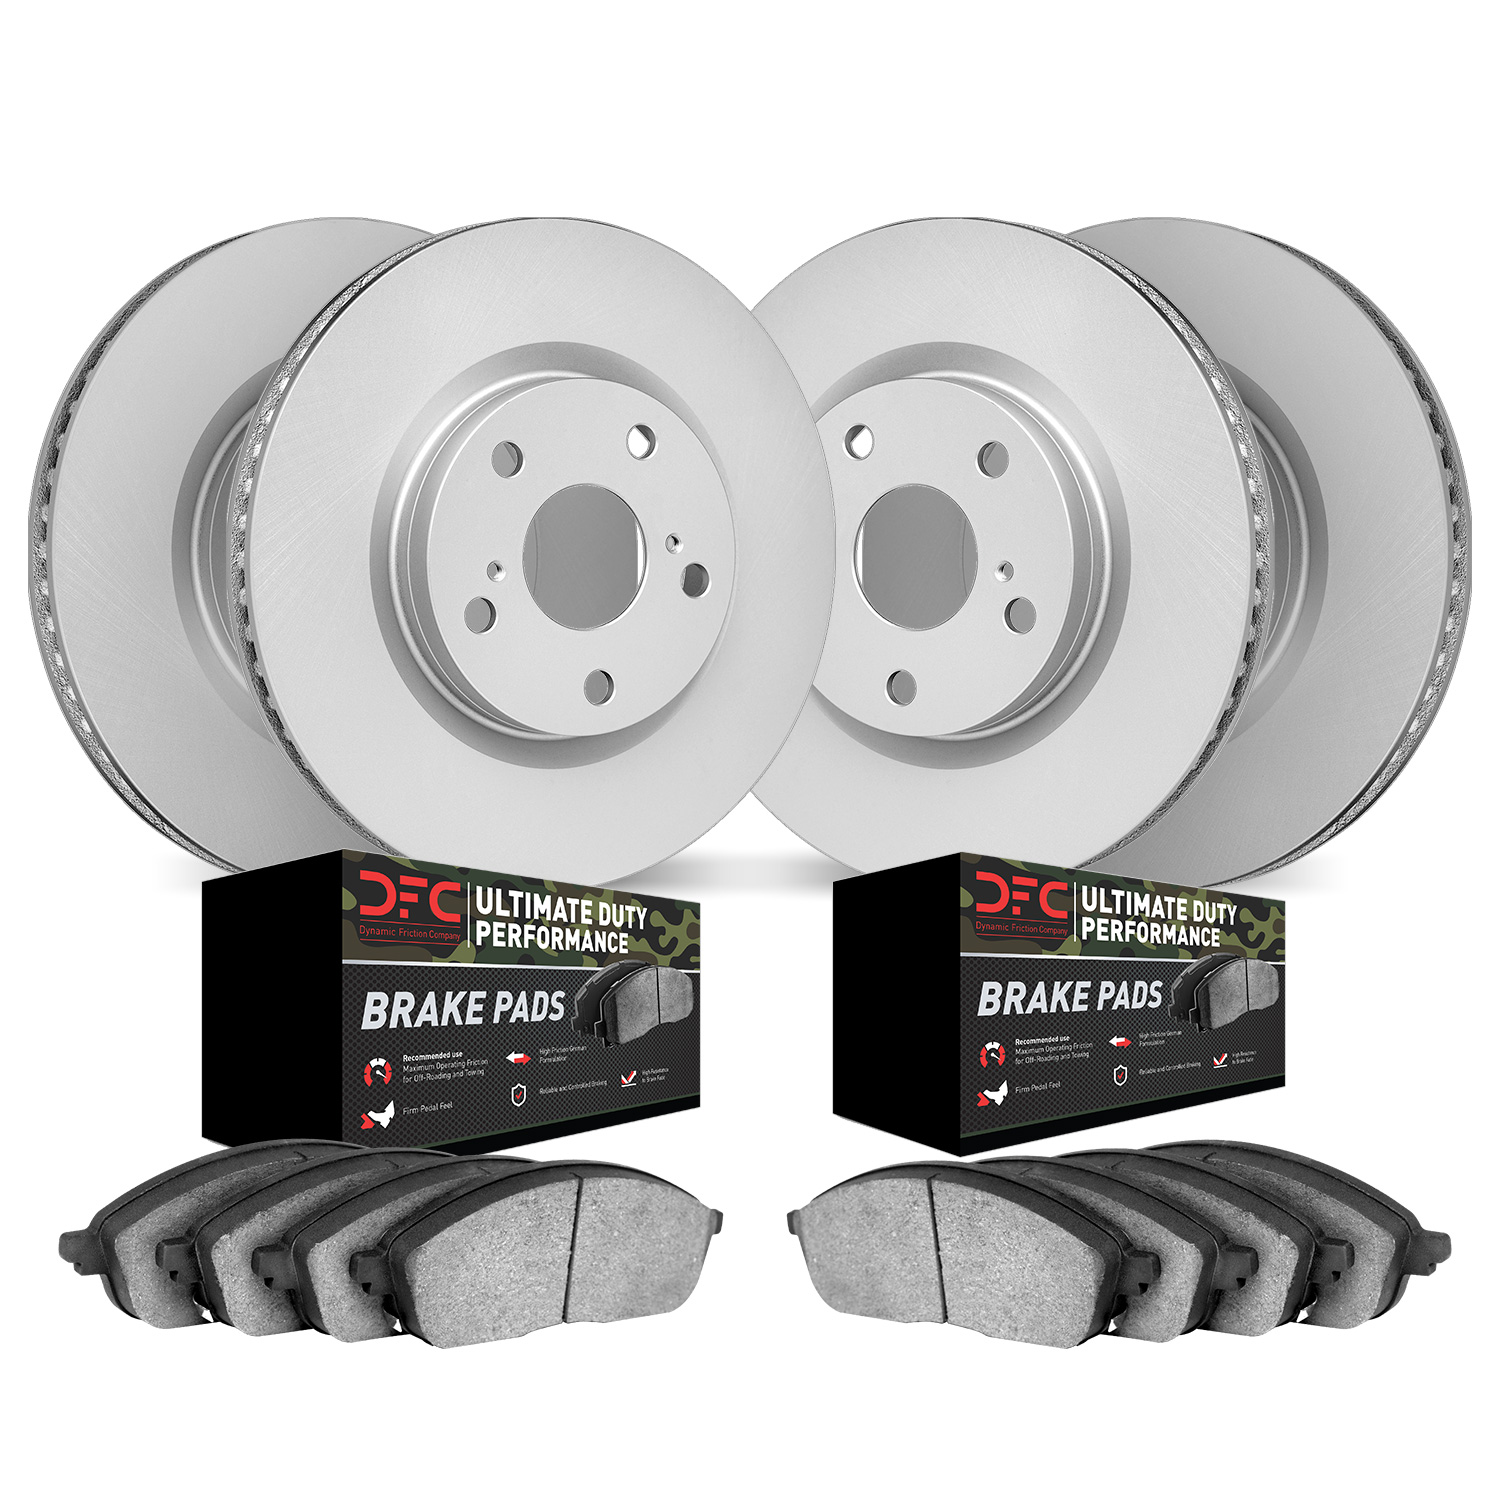 4404-46001 Geospec Brake Rotors with Ultimate-Duty Brake Pads Kit, 2009-2015 GM, Position: Front and Rear